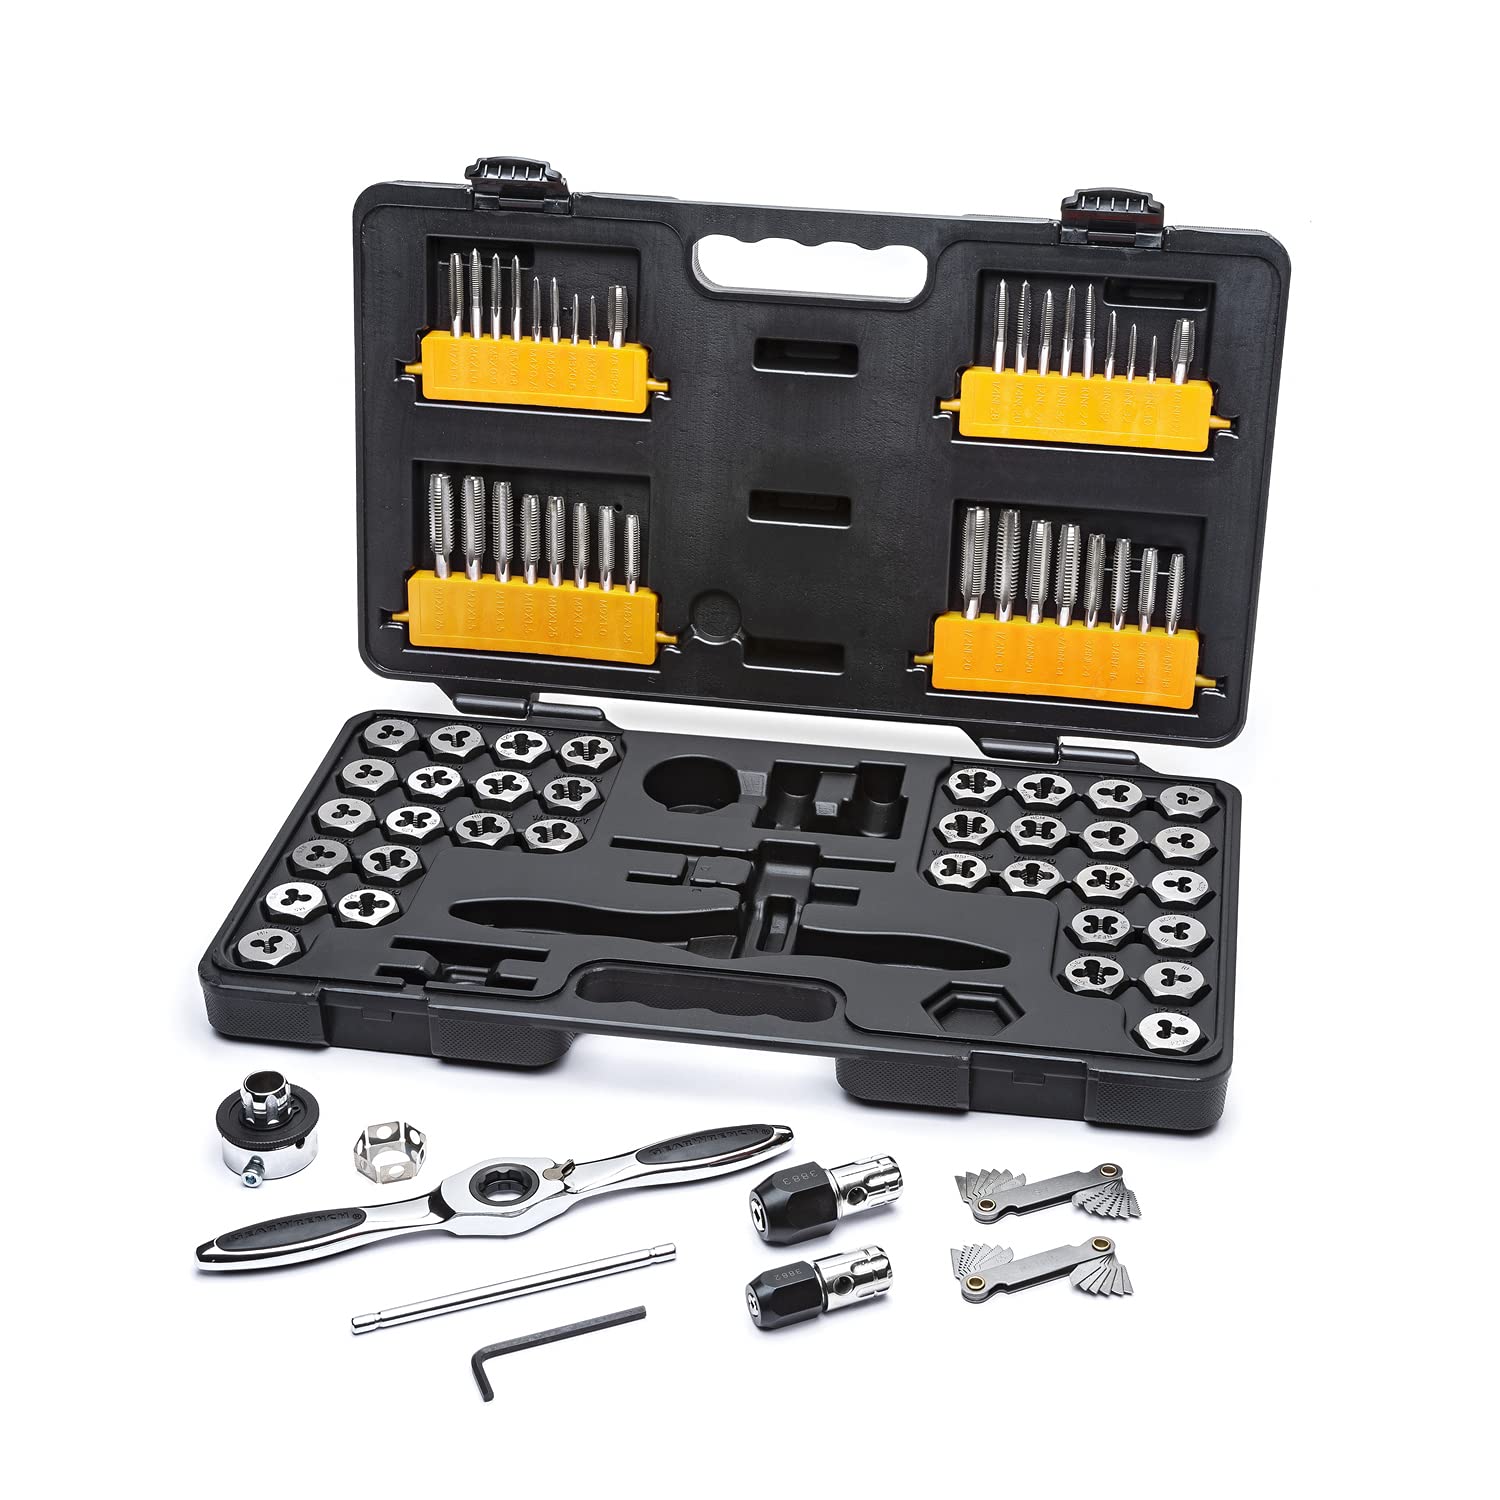 GEARWRENCH 77 Piece Ratcheting Tap and Die Set, SAE/Metric - 3887 - - Amazon.com $110